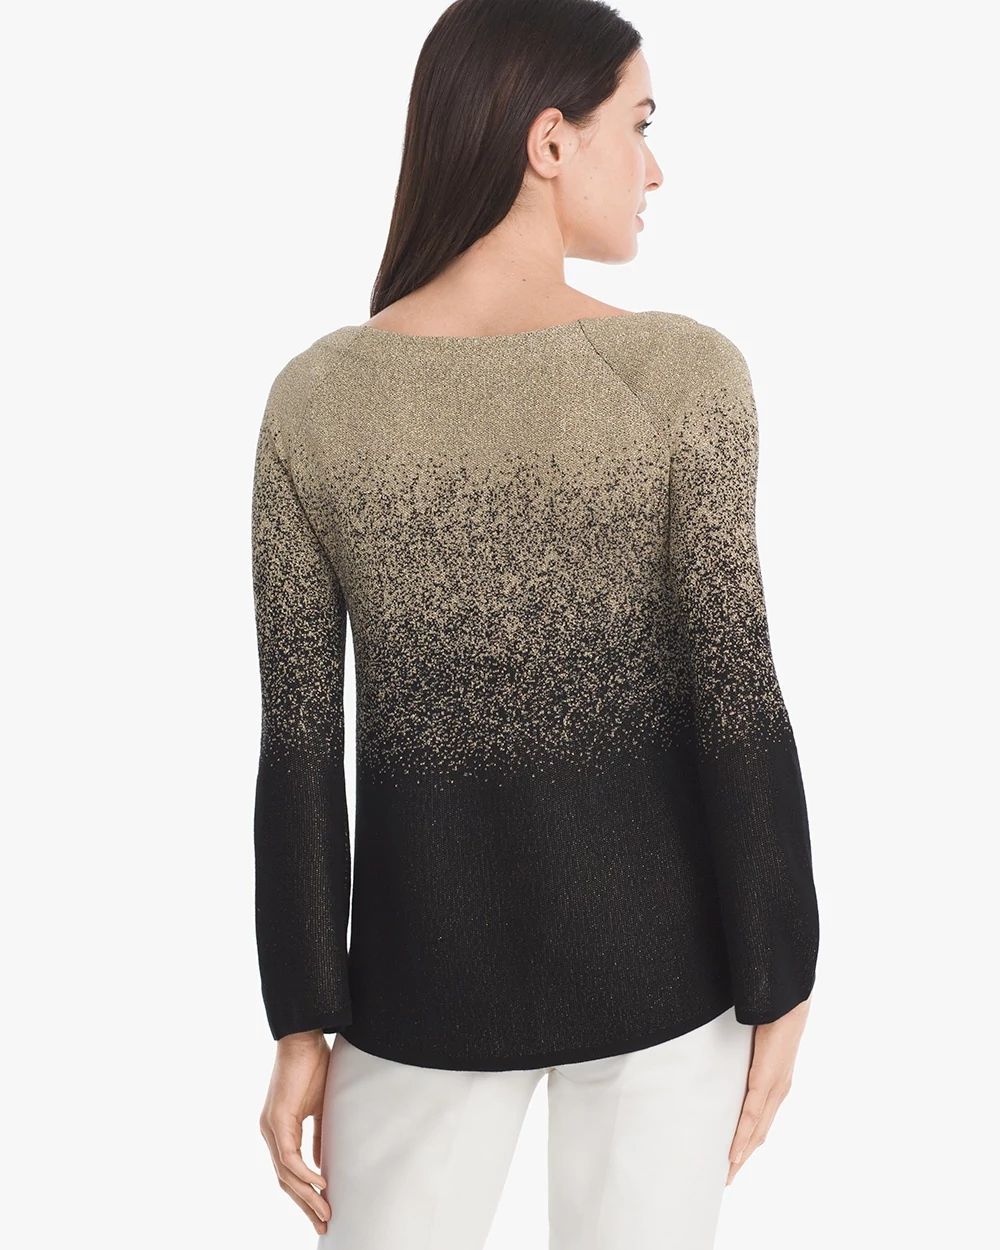 Metallic Ombre Pullover Sweater click to view larger image.